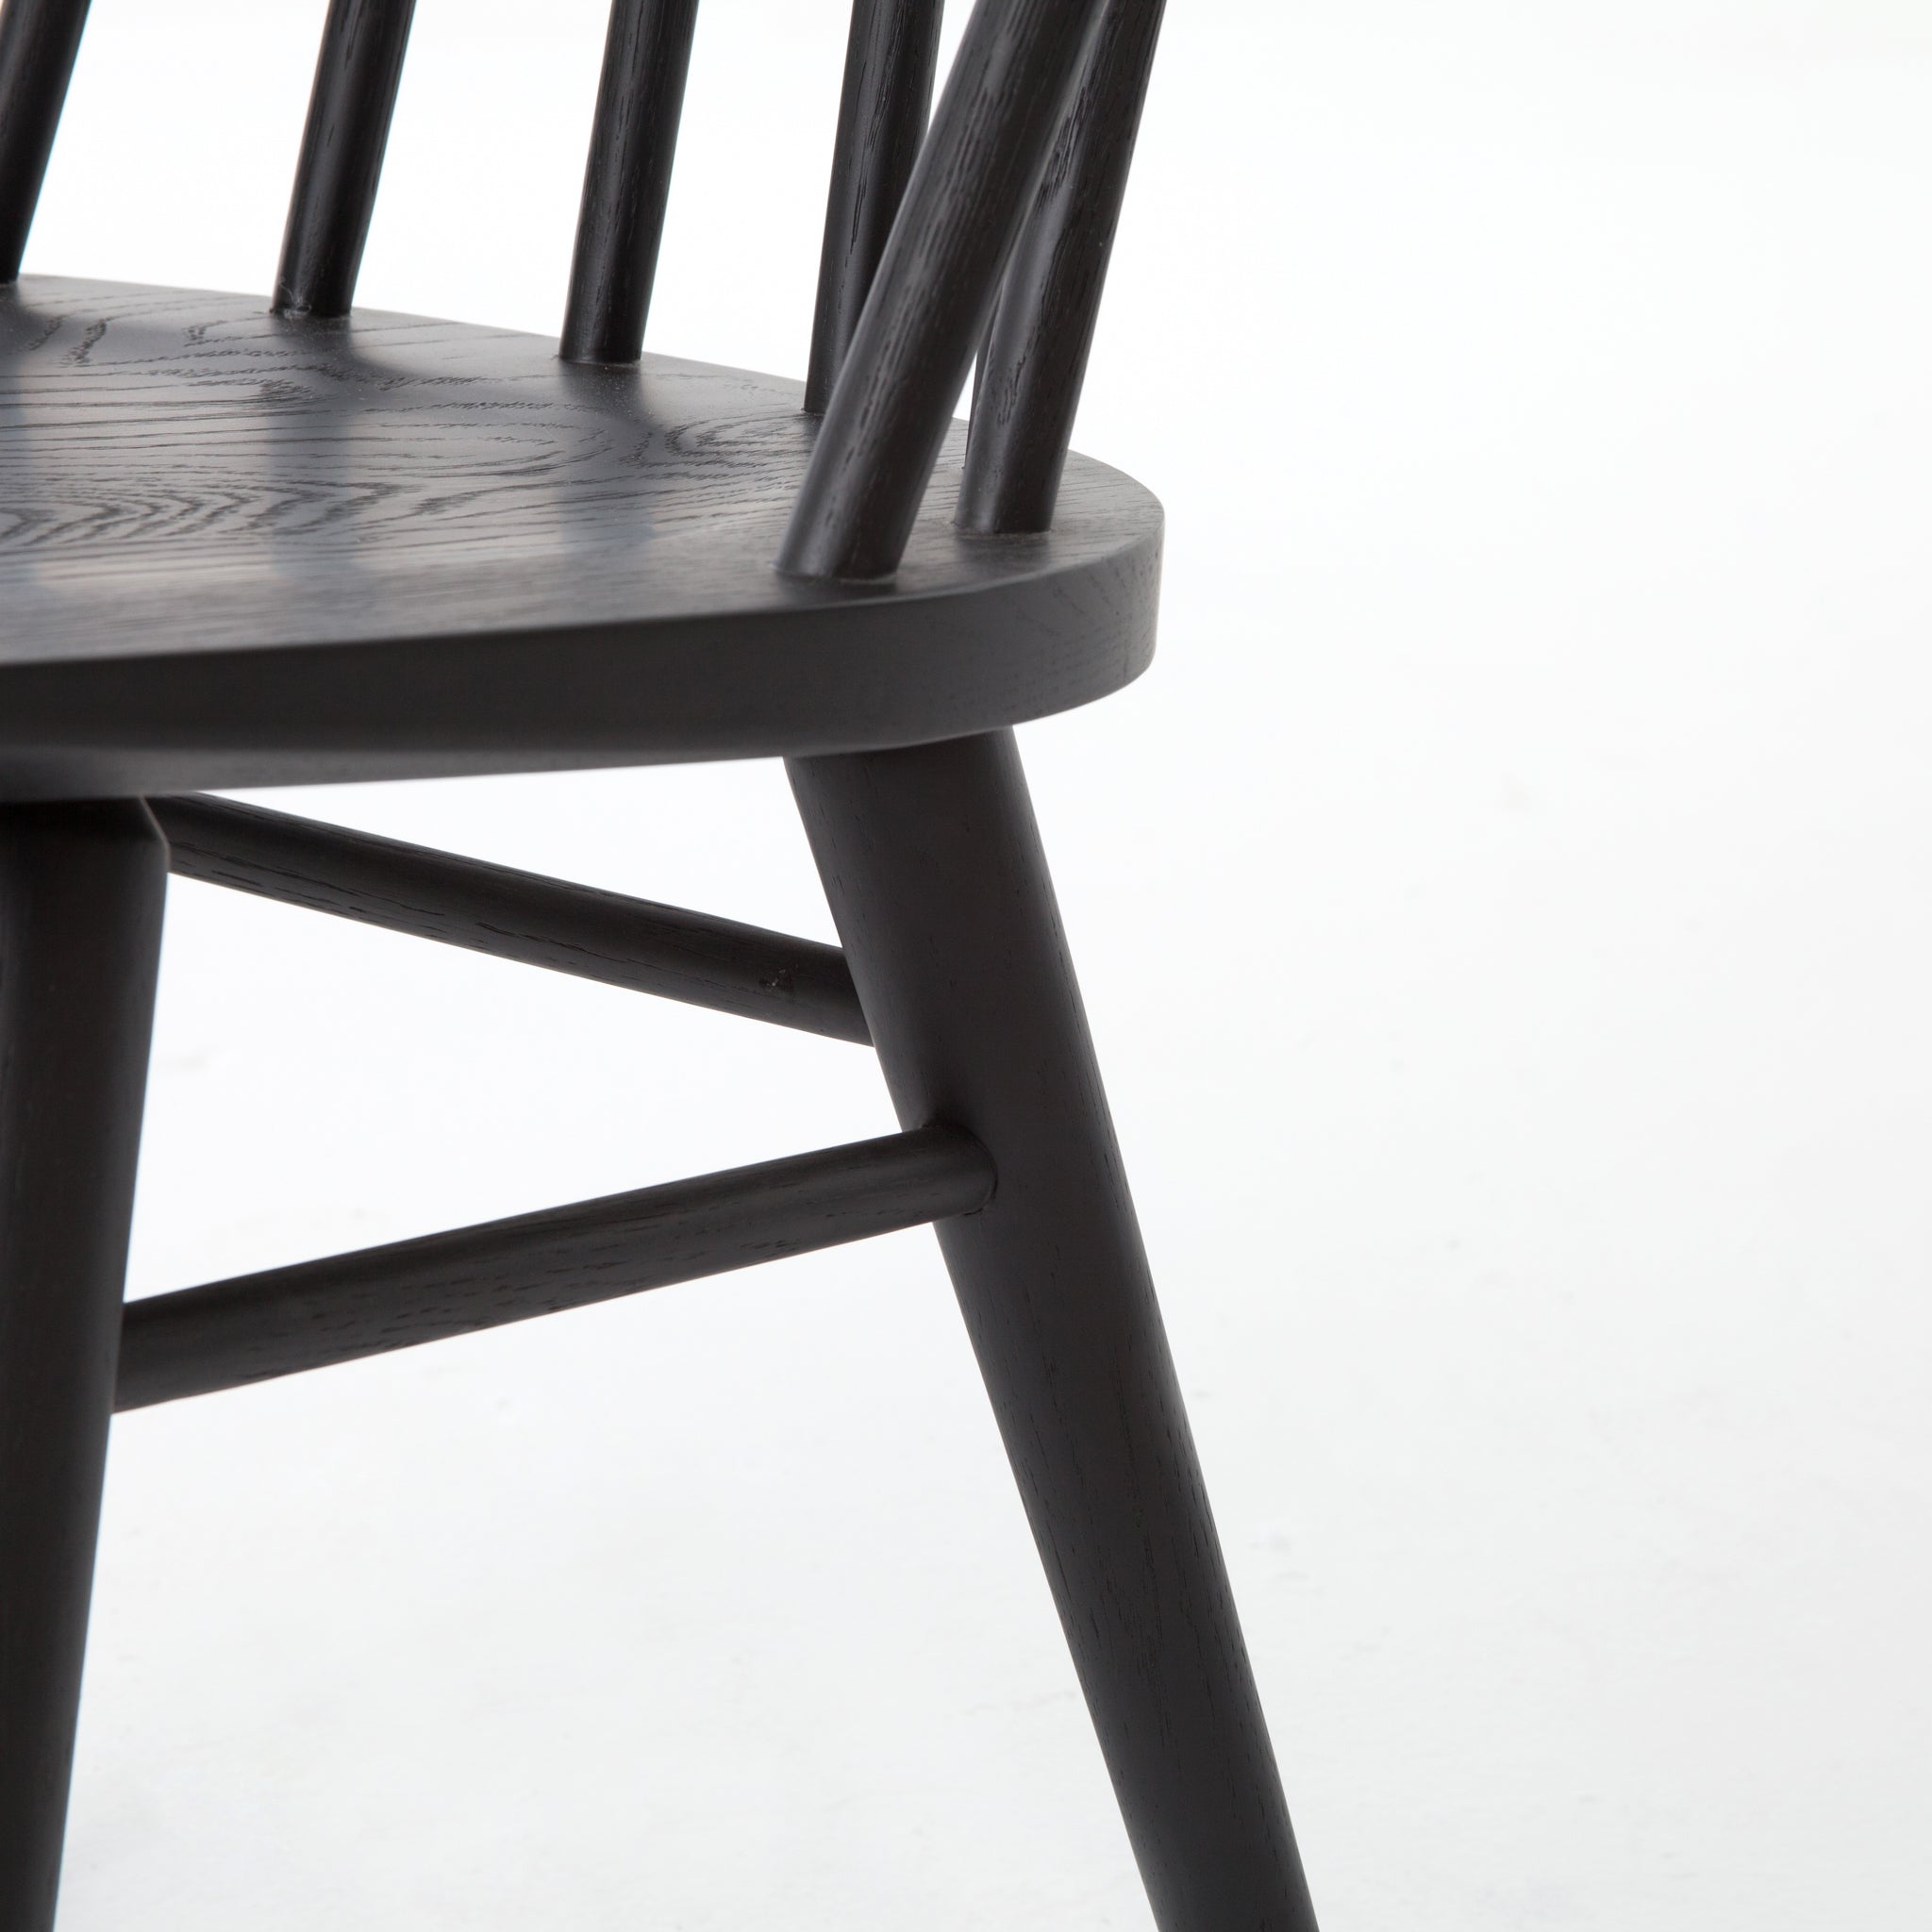 Try a cleaner, more modern take on the traditional Windsor with our Windsor Dining Chair. This tall beauty is wire-brushed to bring out the cathedral grain in the oak, and stained deep black for lovely contrast with more industrial decor. This chair is perfect for a dining room or that special nook in your home.